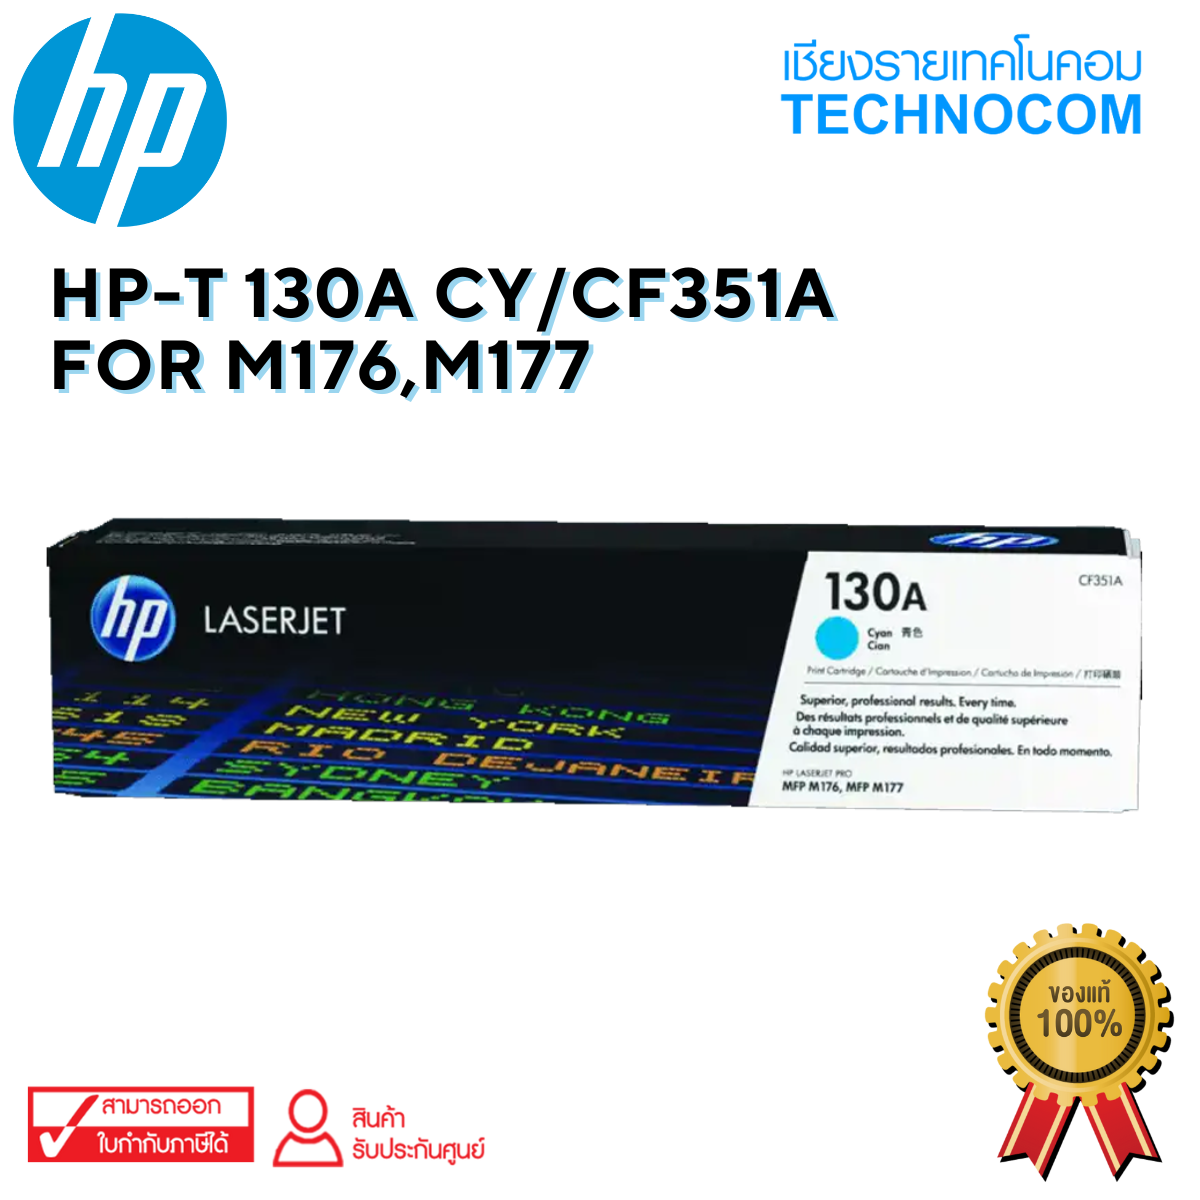 HP-T 130A Cy/CF351A FOr M176,M177